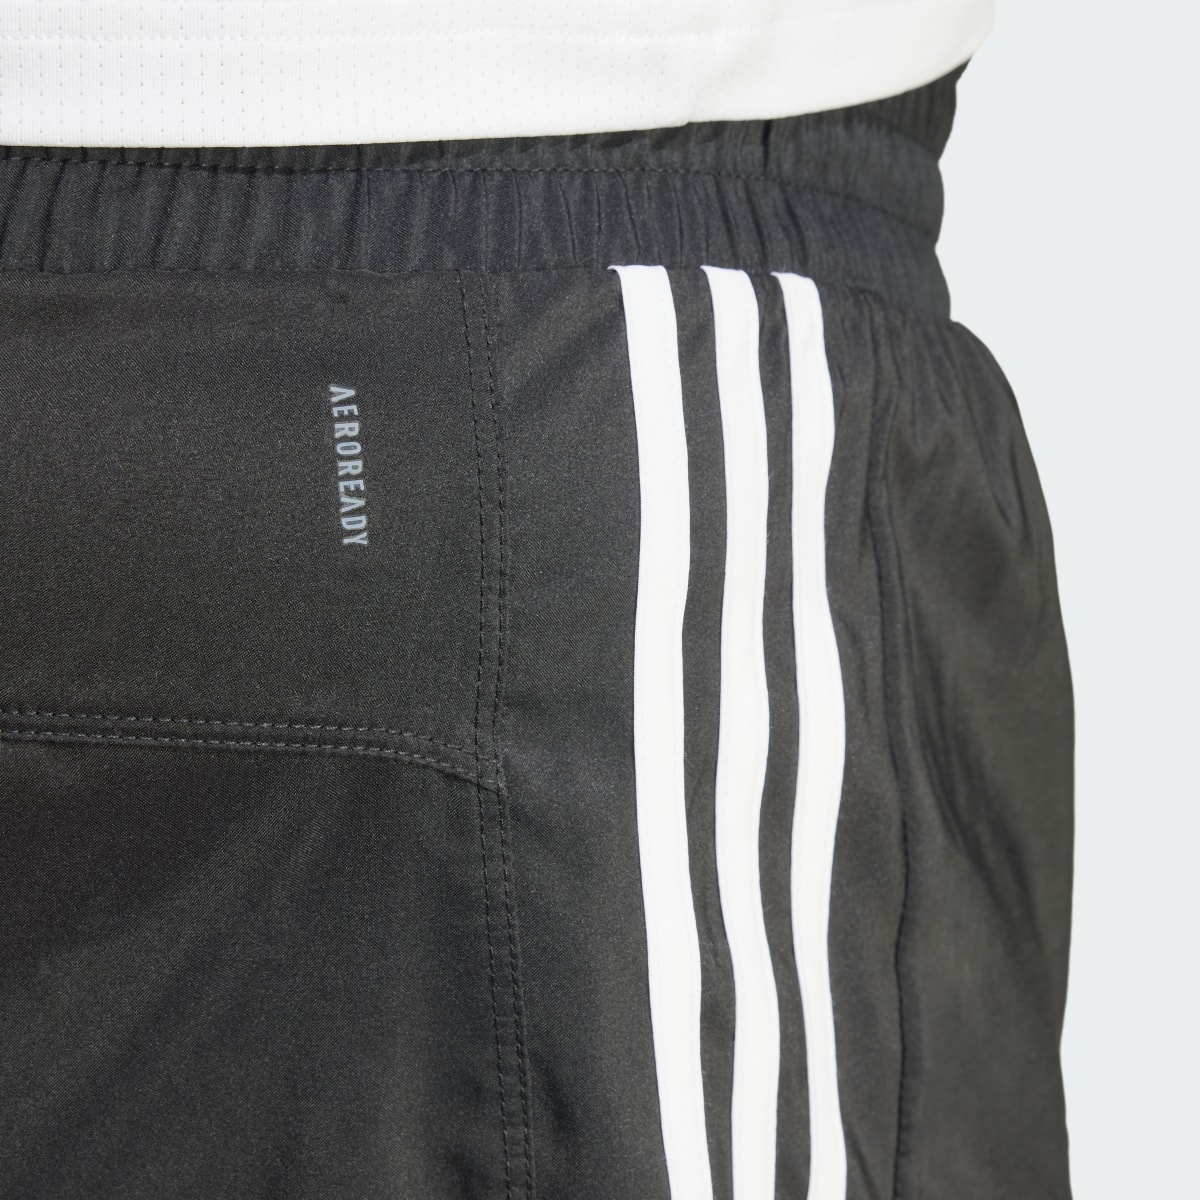 Adidas Pacer Training 3-Stripes Woven High-Rise Shorts (Plus Size). 5